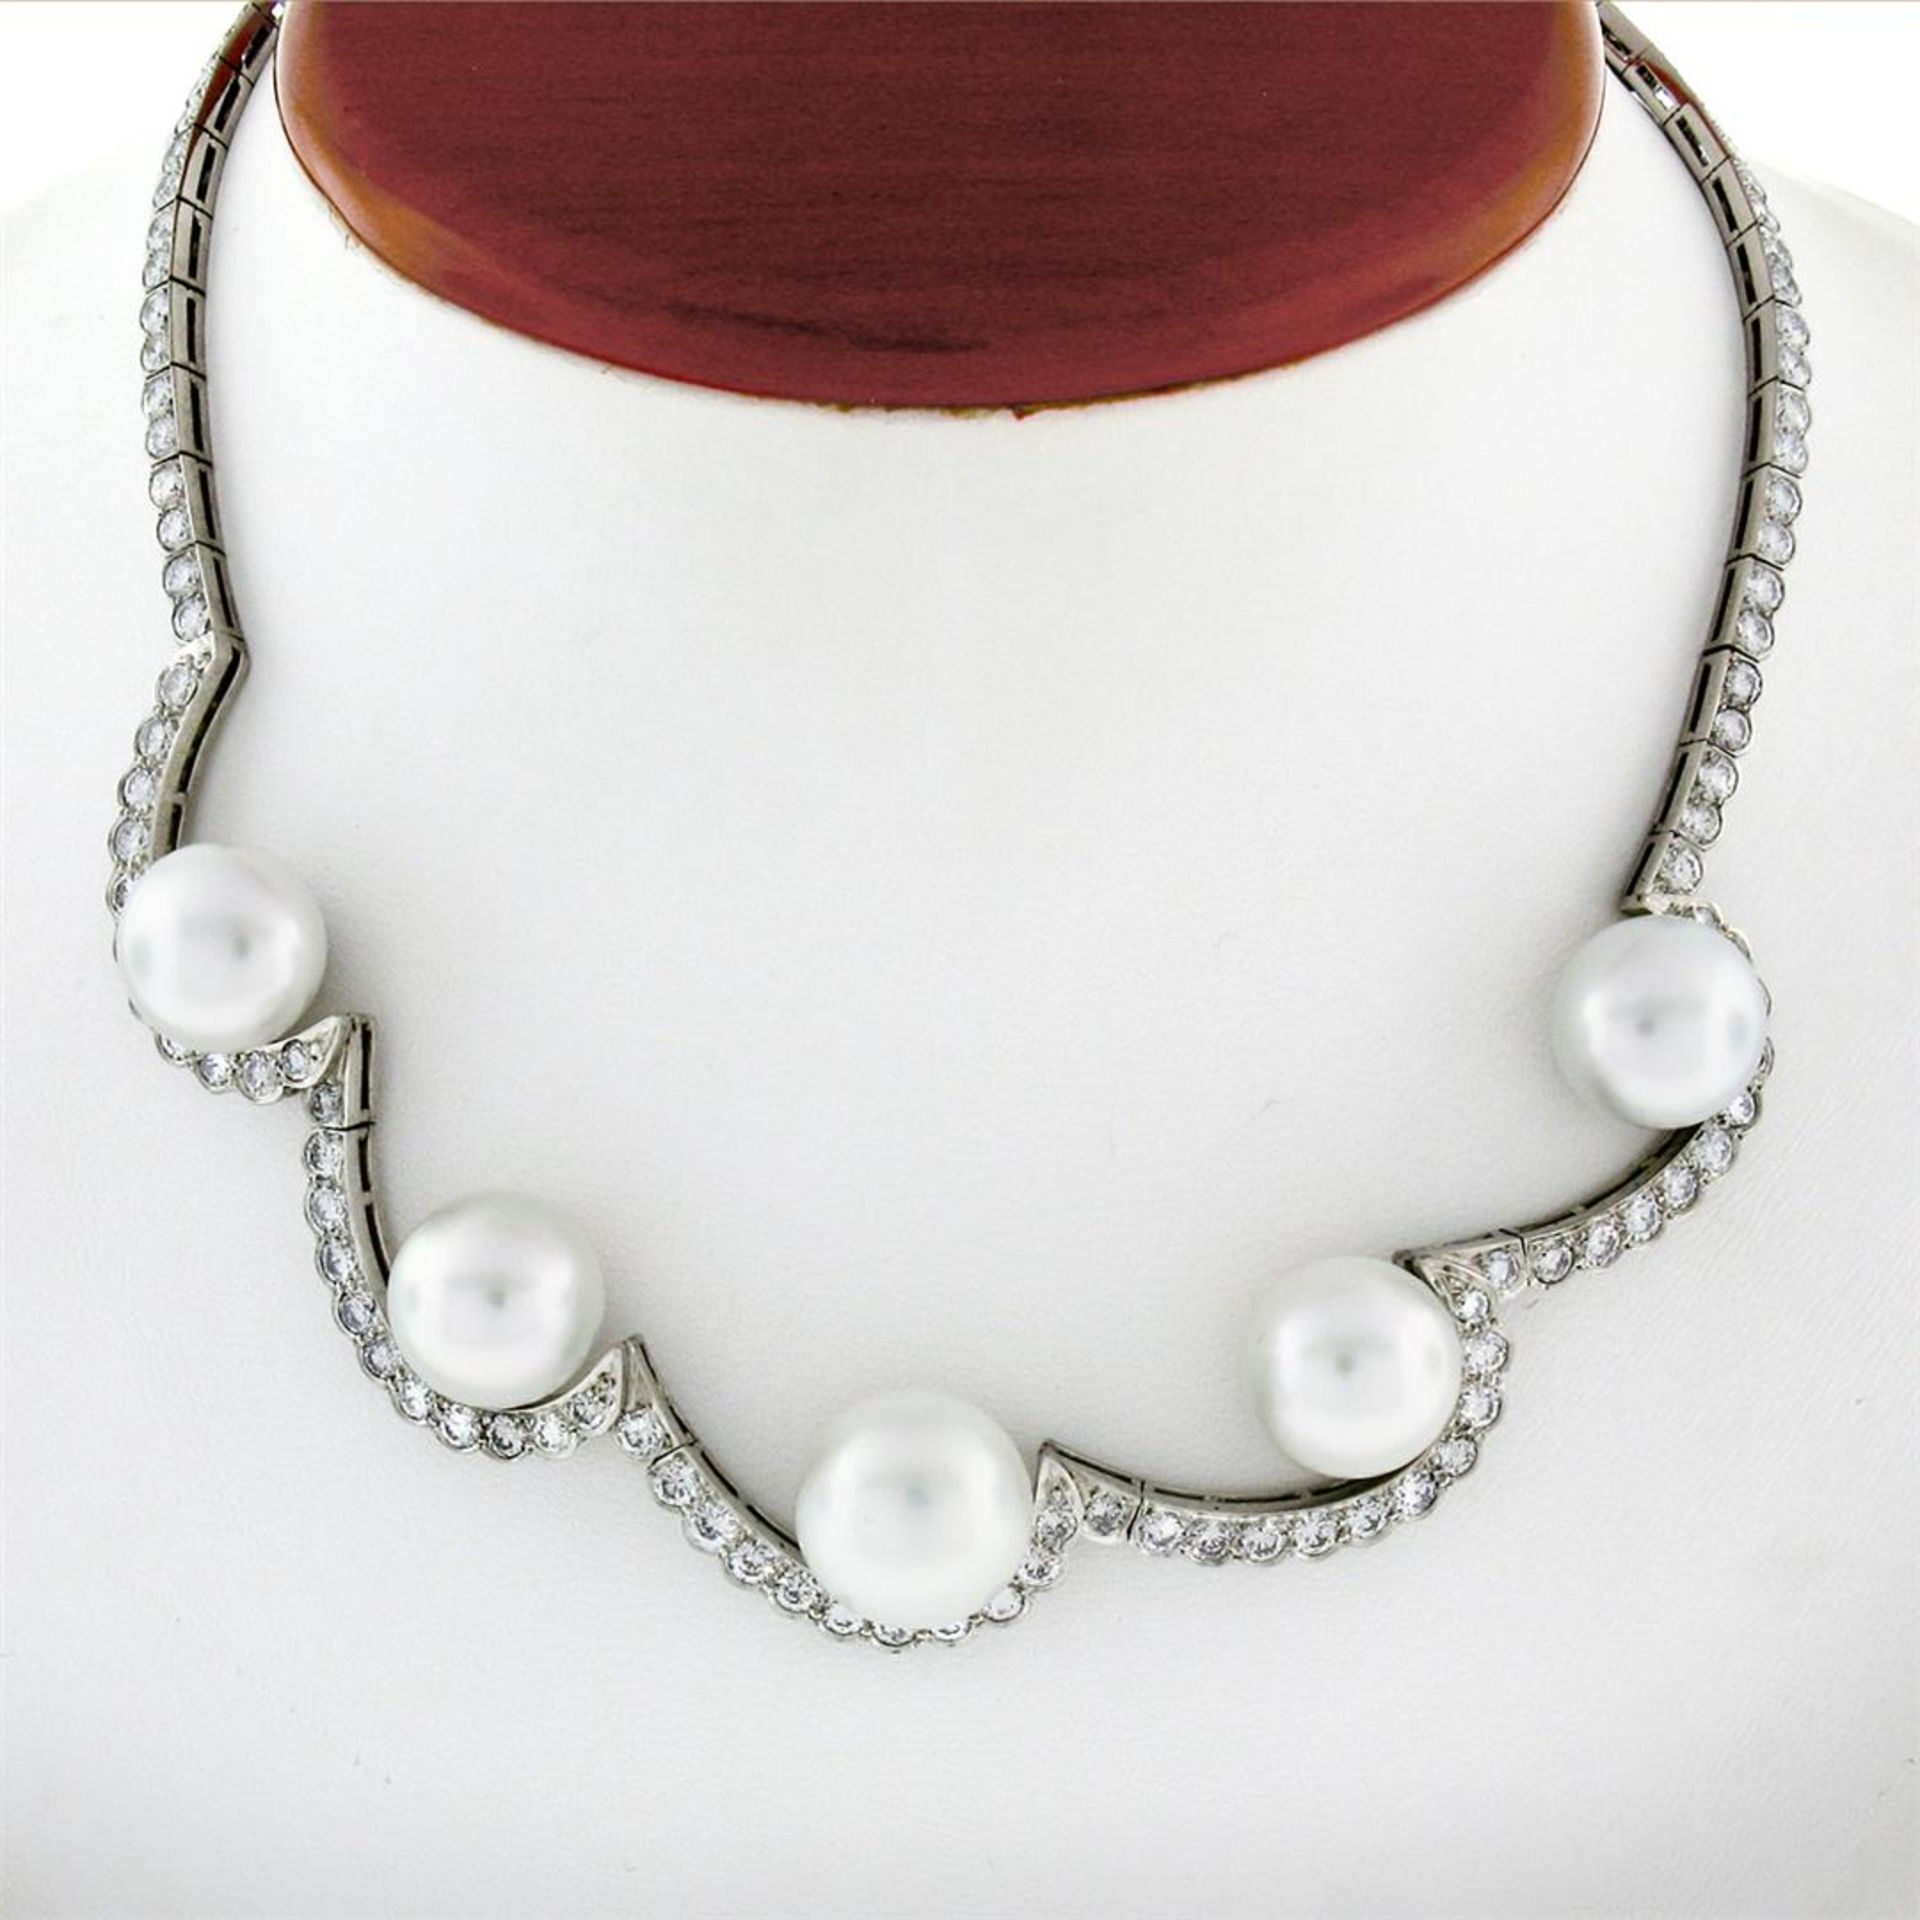 Platinum 10.25ctw Diamond & Floating South Sea Pearl Statement Necklace